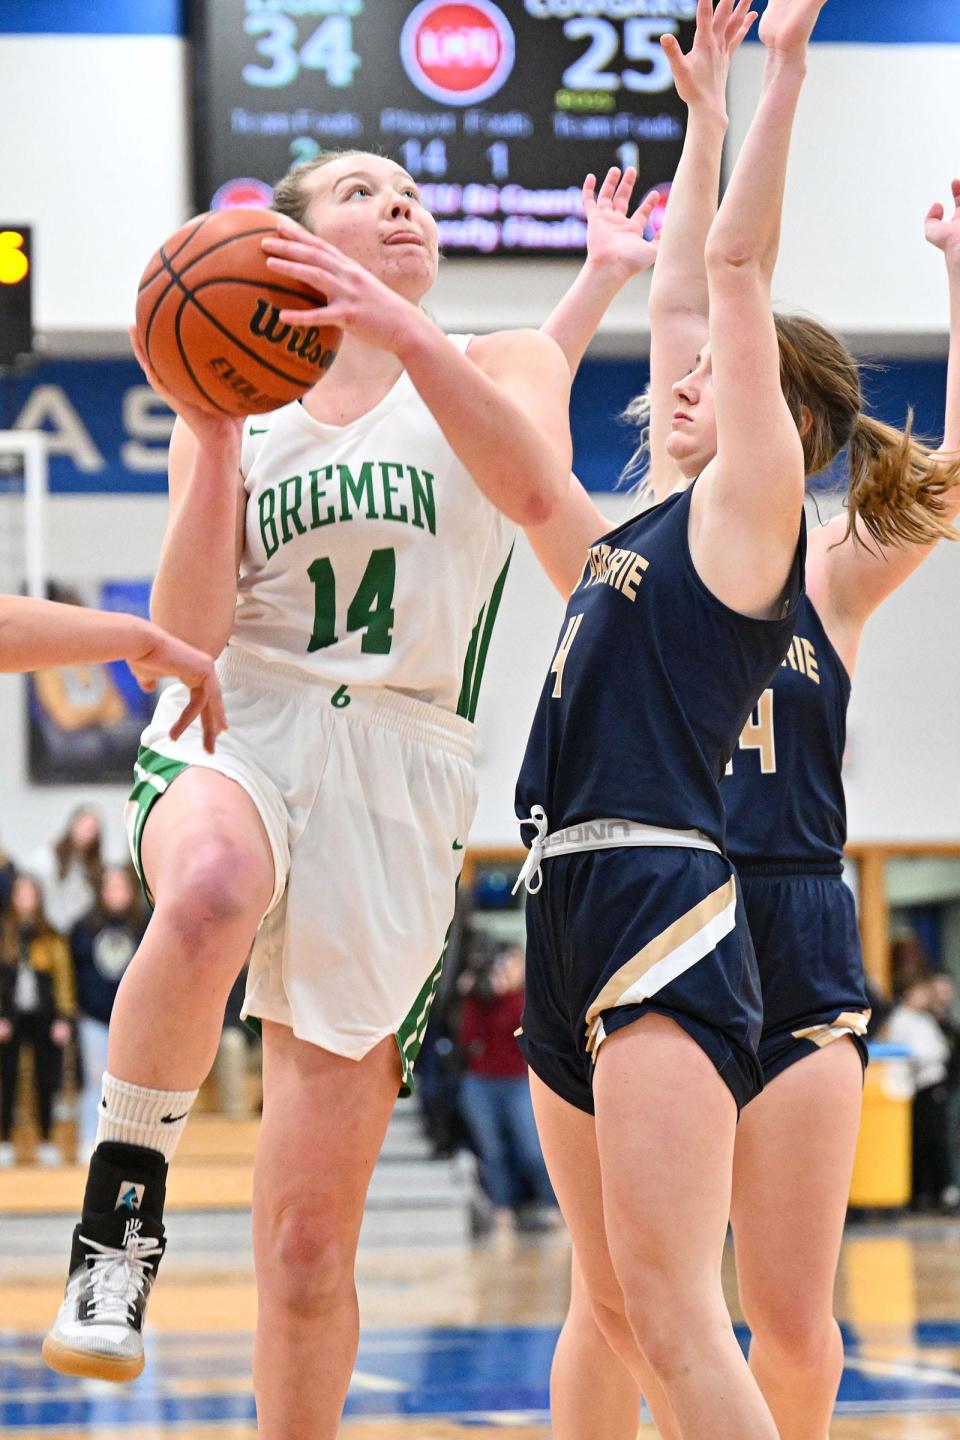 Bremen’s Katie Moyer (14) goes up for a shot as New Prairie’s Eva Dodds (4) defends in the third quarter of the TCU Bi-County Girls Varsity Finals Saturday, Jan. 22, 2022, at LaVille High School.